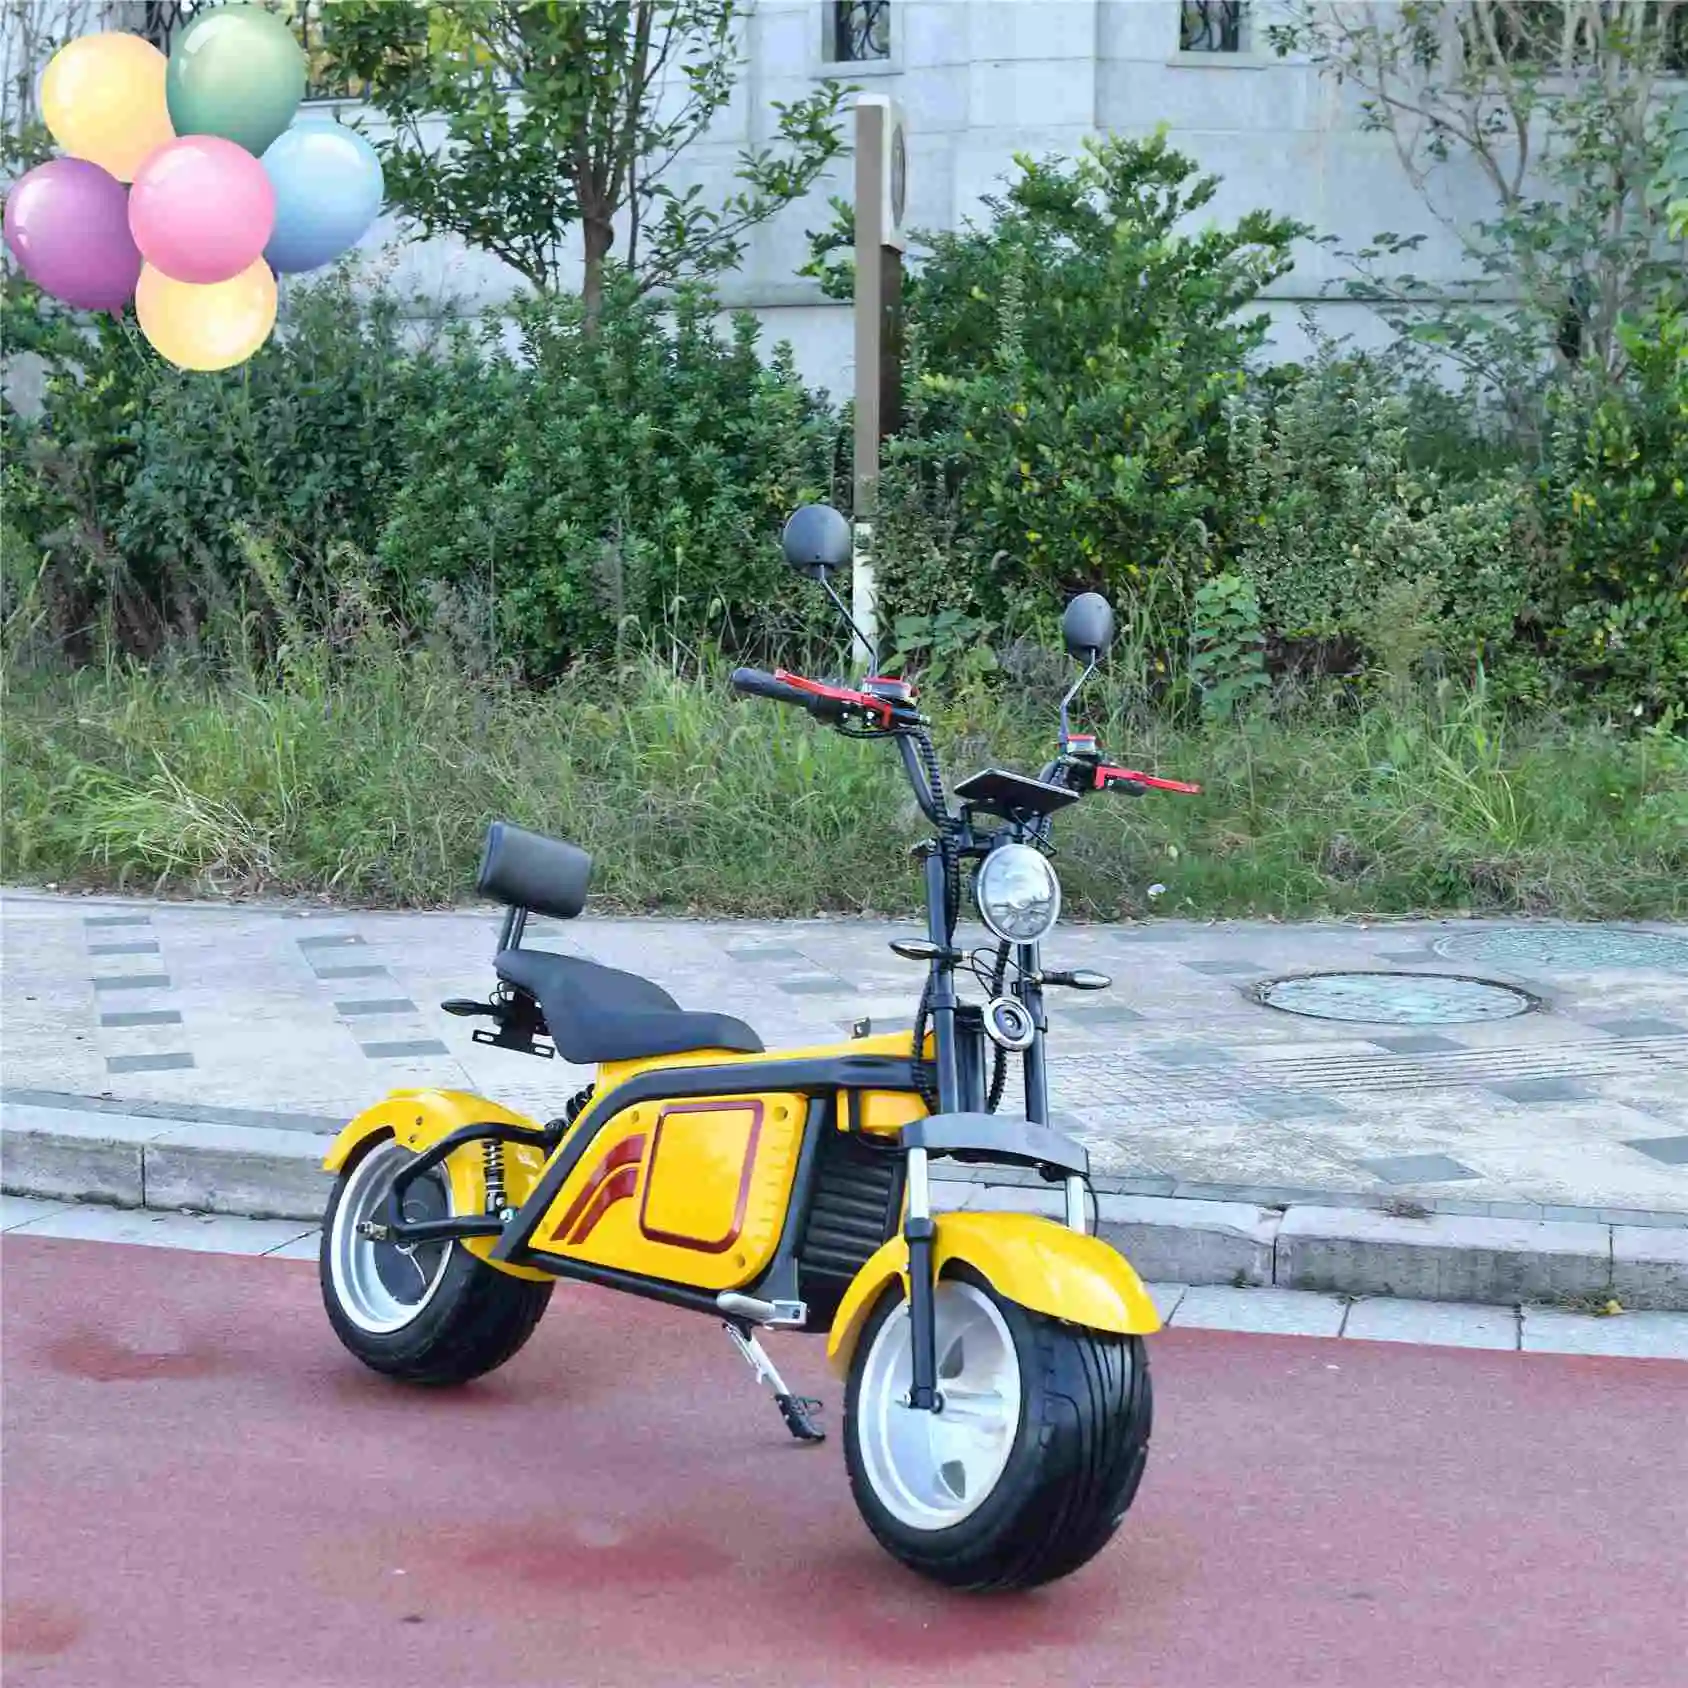 

New 60V 12Ah 2000W Can Up To 3000W For Adults Big Wheel Powerful Off Road Pedal Assisted Electric Motorcycle Scooter Citycoco